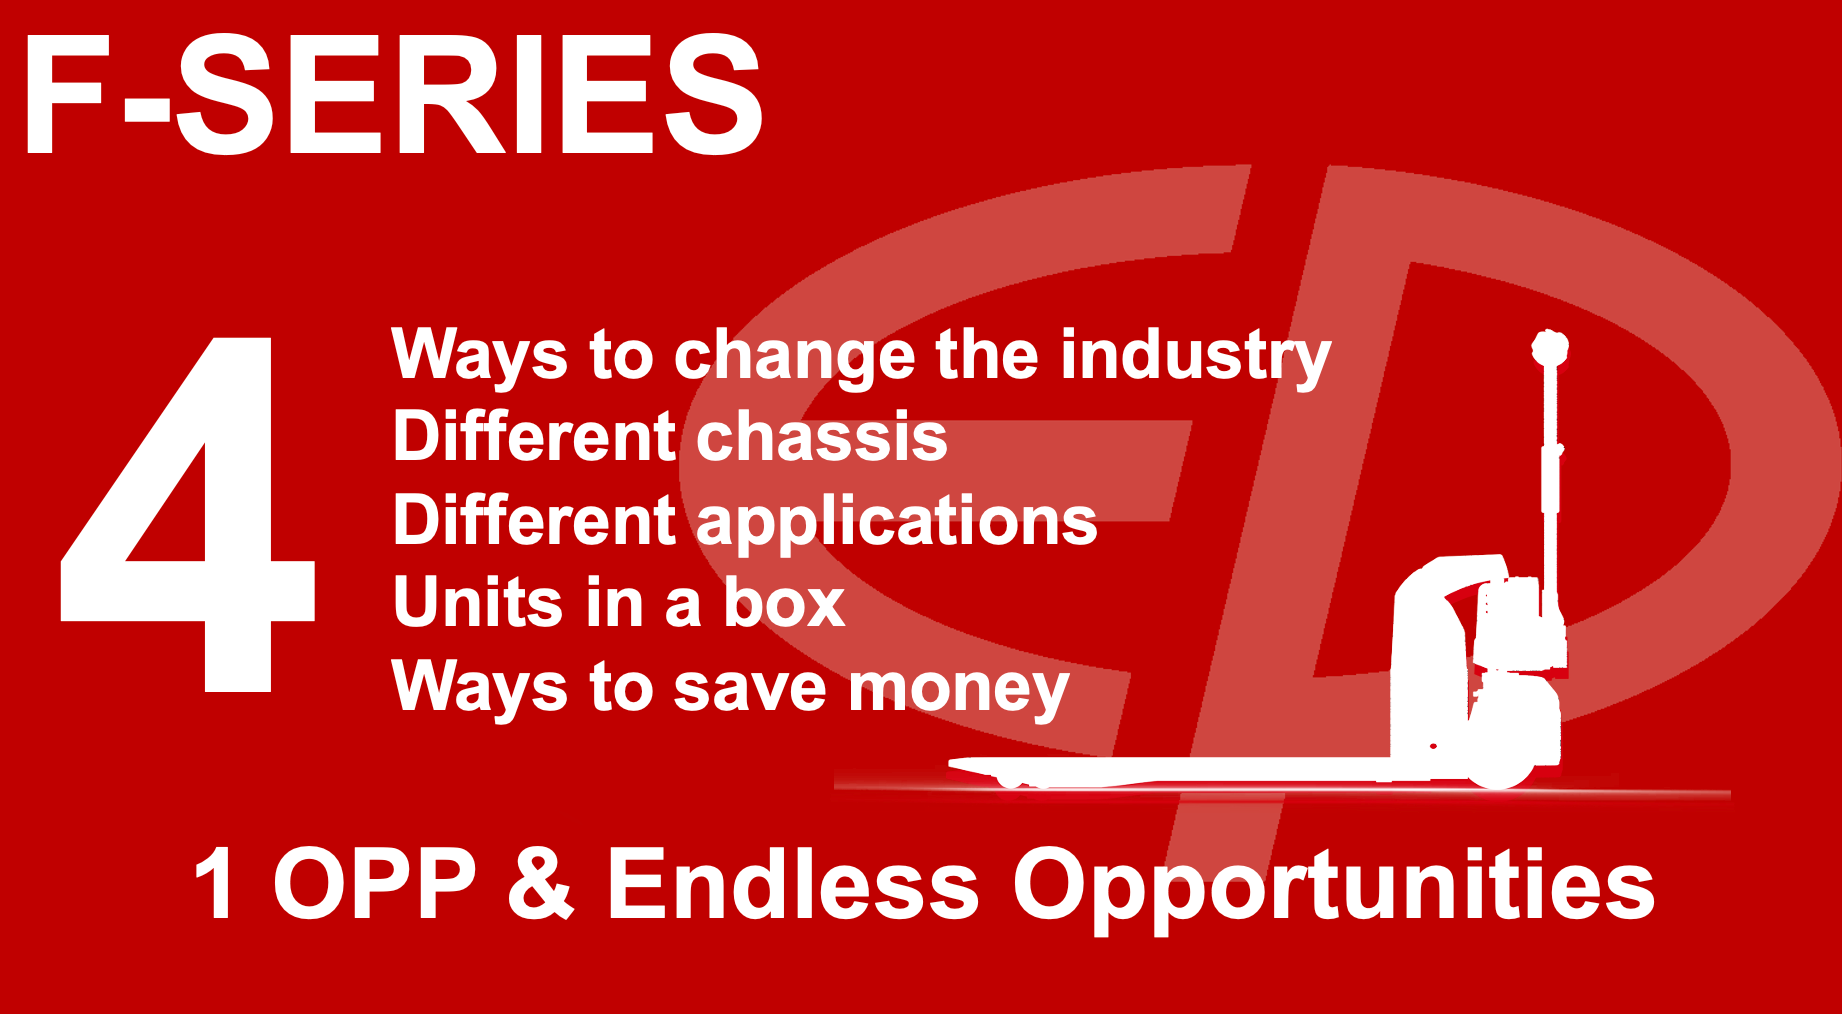 Opportunities offered by the F series